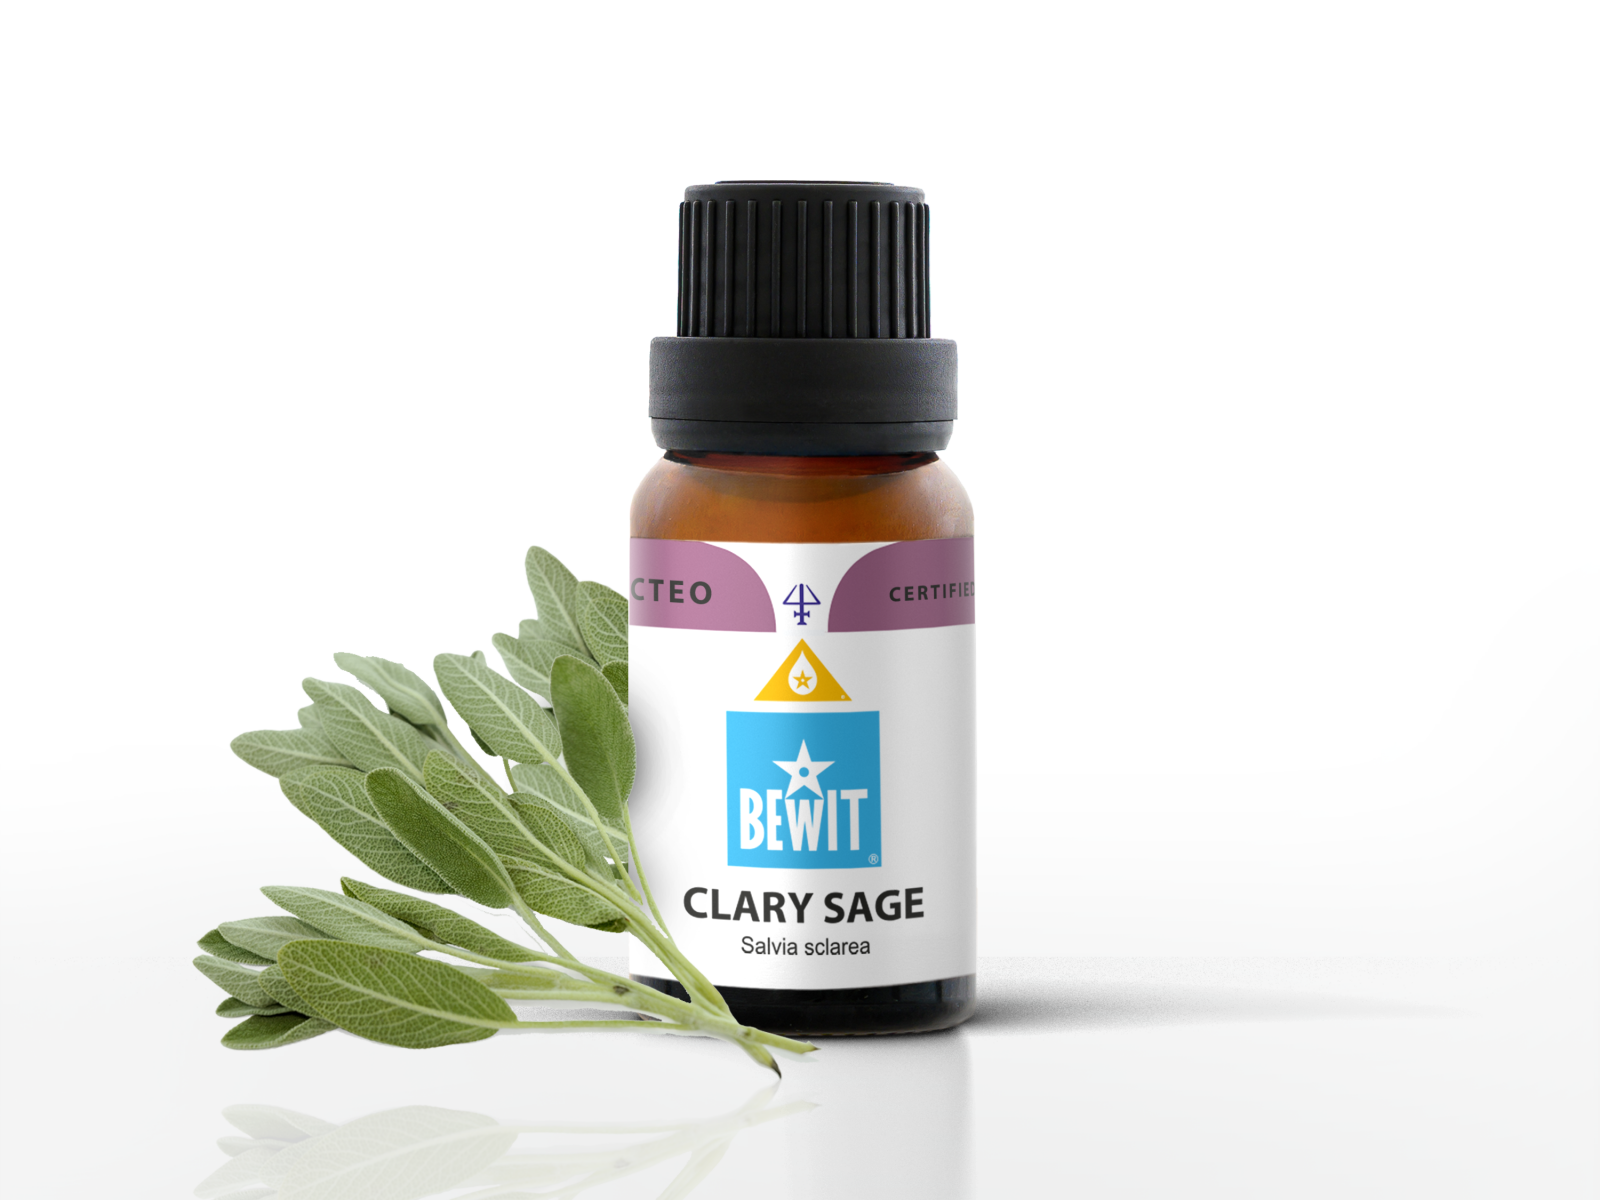 Clary sage - It is a 100% pure essential oil